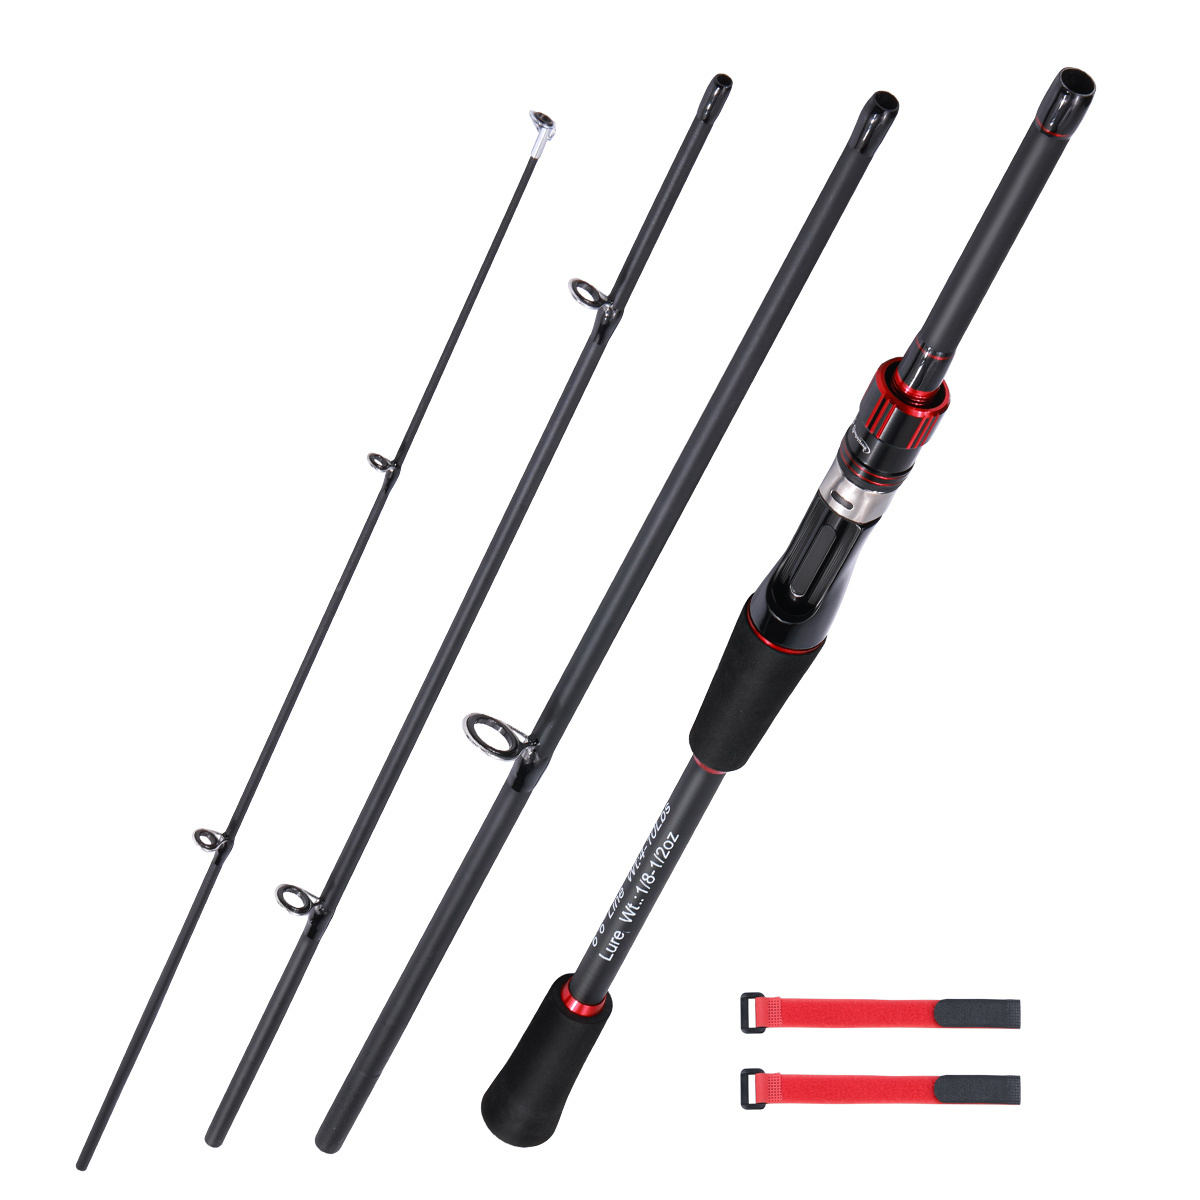 1pc 2 Sections Trolling Fishing Rod, 180cm/70.9inches Fiberglass Fishing  Pole, Fishing Tackle For Saltwater, Offshore, 100-200lbs